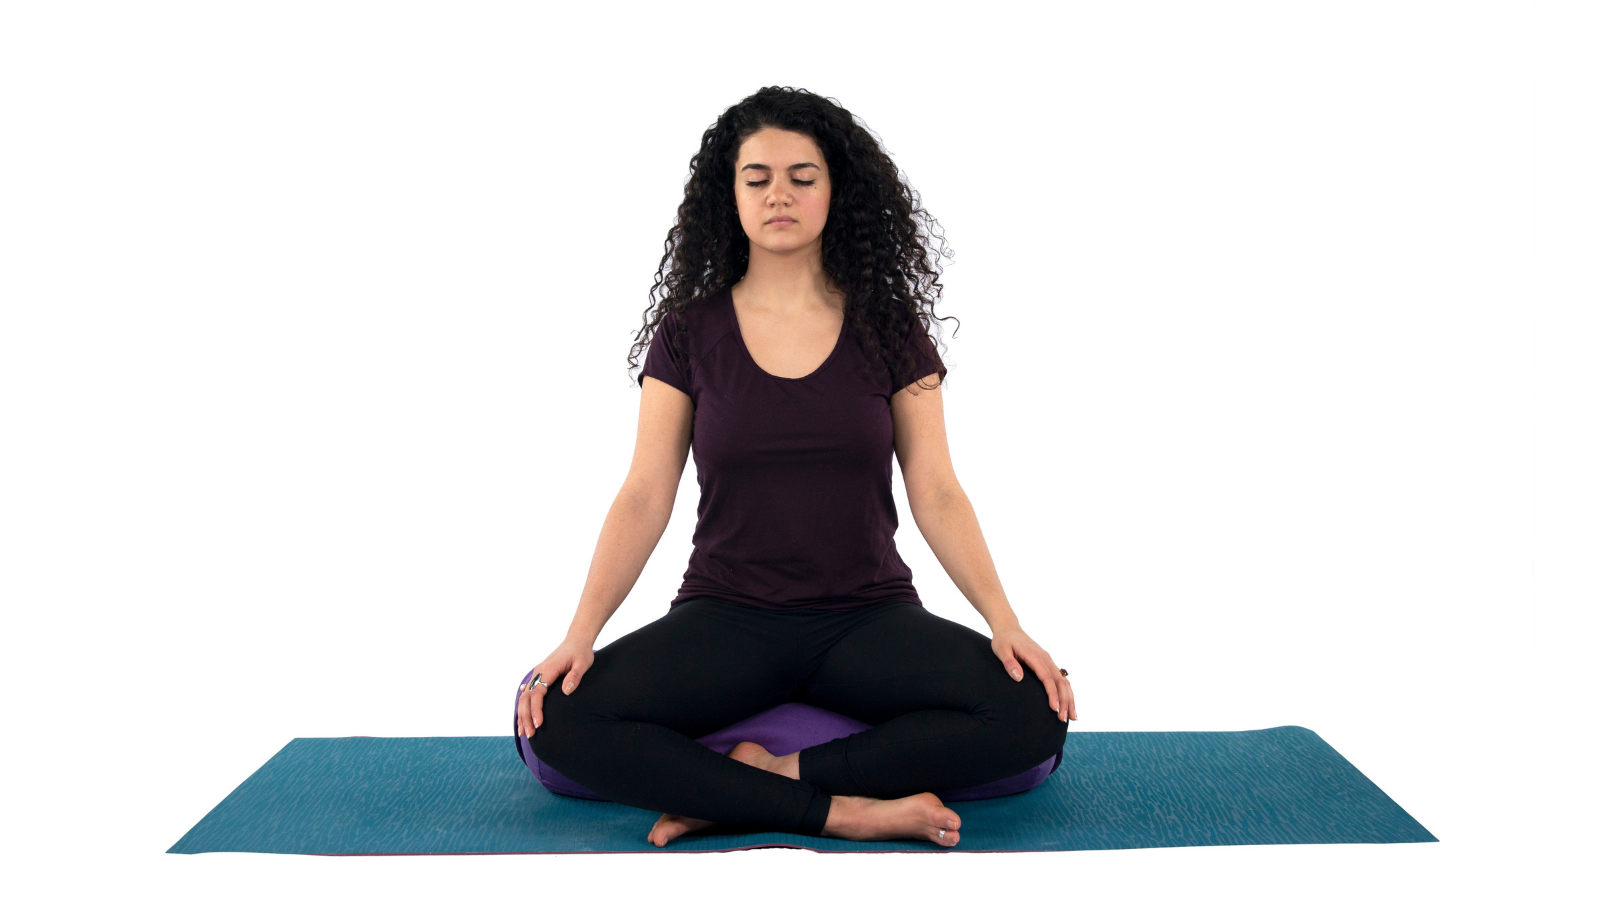 Meditation to calm mind and body is often an integral part of yoga practice for pelvic floor